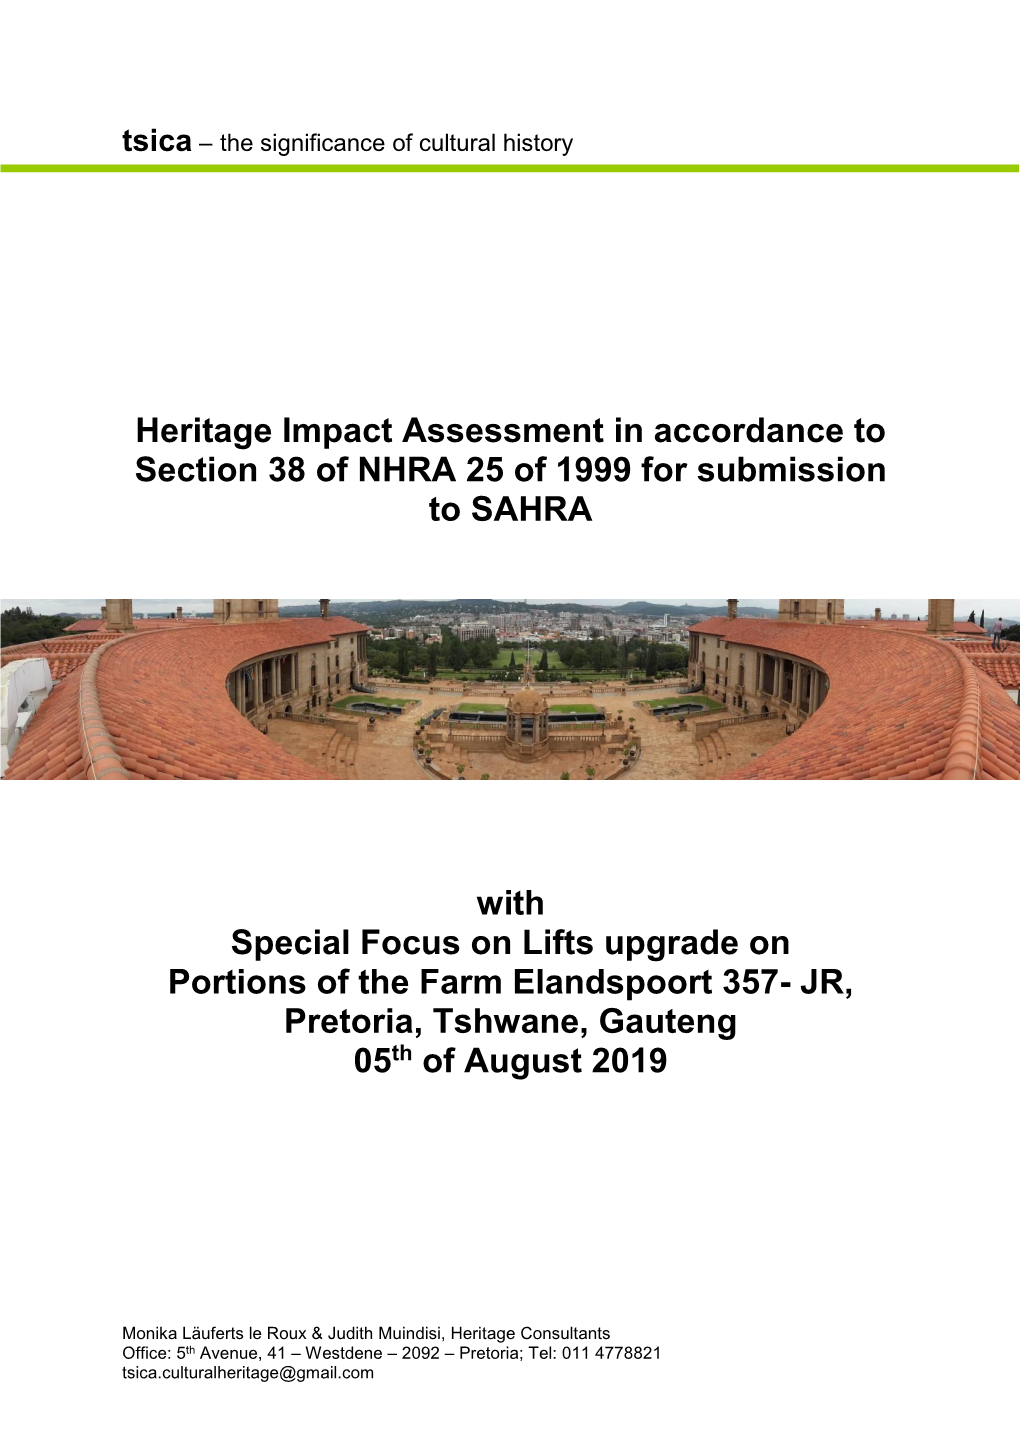 Heritage Impact Assessment in Accordance to Section 38 of NHRA 25 of 1999 for Submission to SAHRA